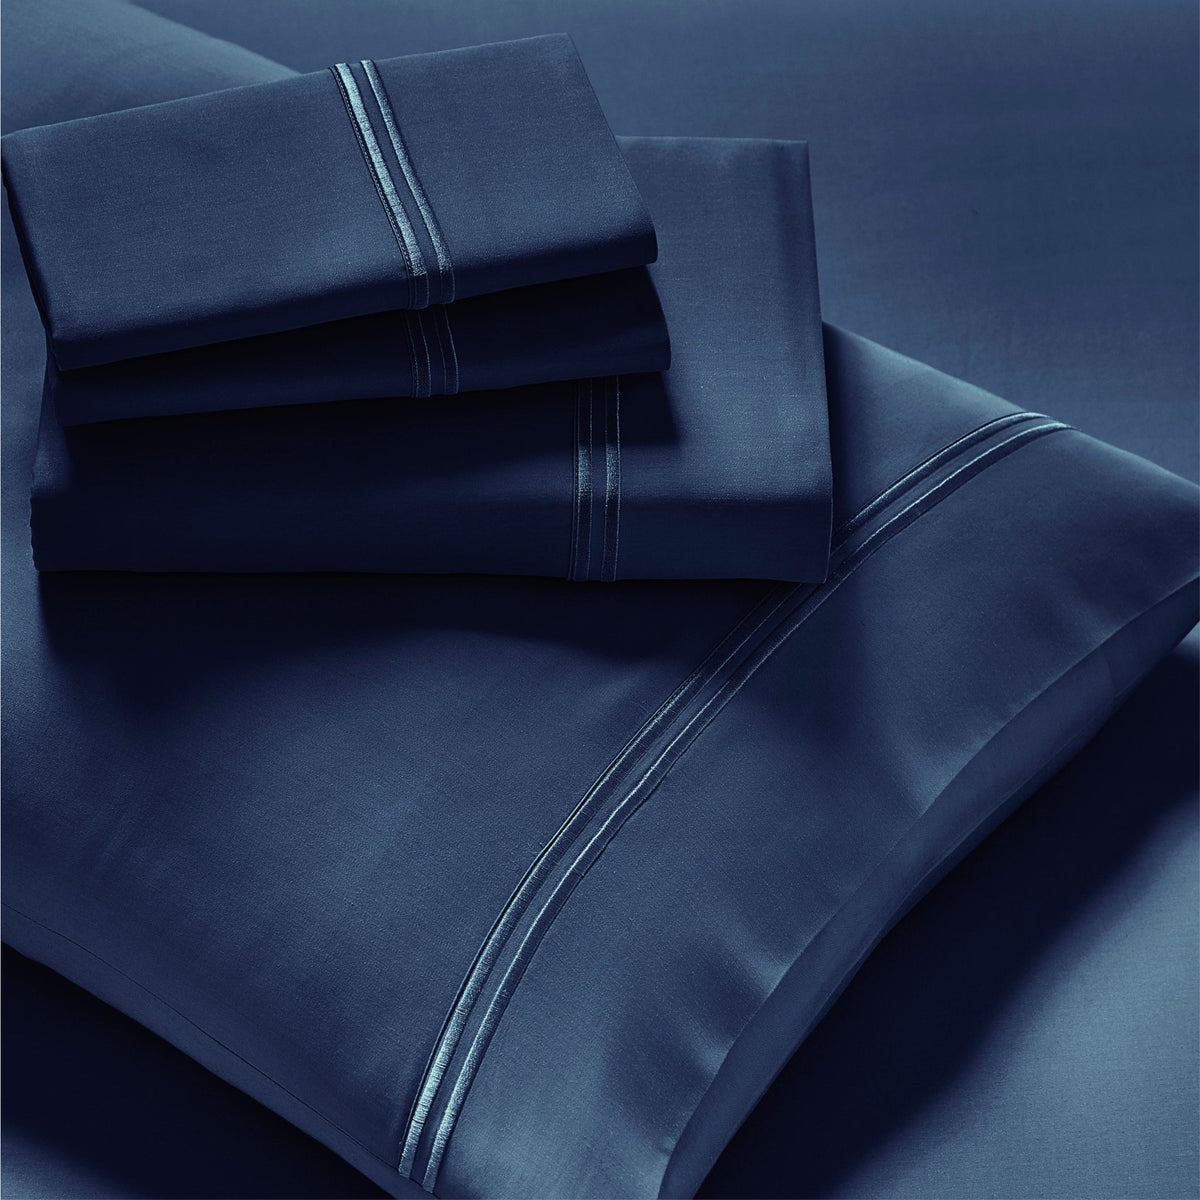 Image showcasing entire Celestial Blue Refreshing TENCEL™ Lyocell Sheet Set. The image includes: a fitted sheet on the bed, a pillowcase on a pillow, a neatly folded flat sheet, and two neatly folded pillowcases.